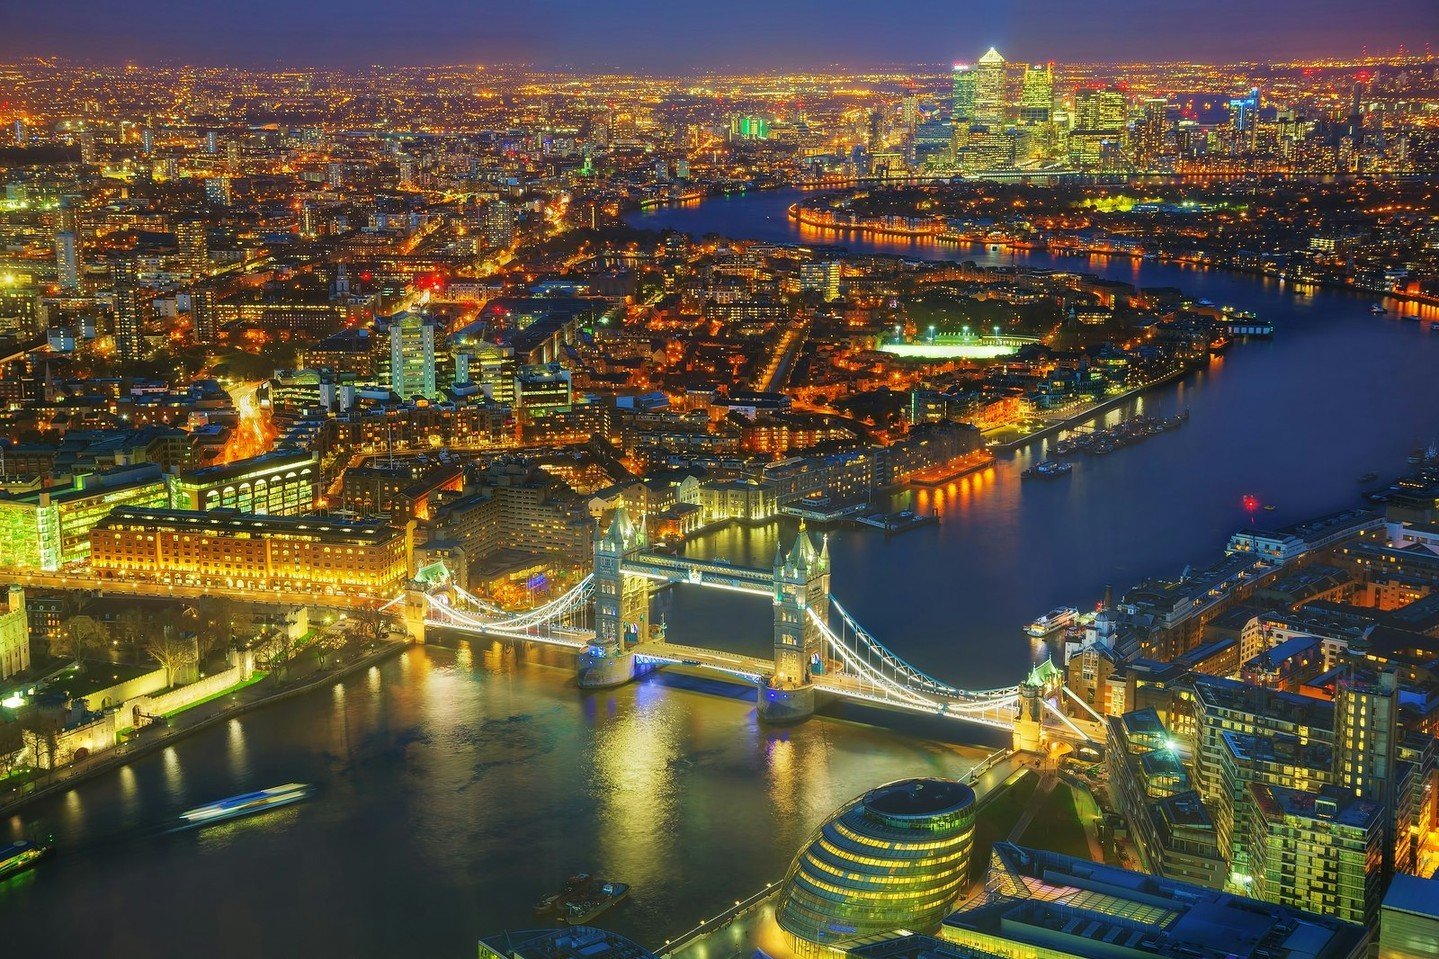 Stop for a moment to admire the magnificent aerial night view of London, England.  With its famous monuments and lively atmosphere, this city is a must-see destination. Let me show you the best of London, day and night! #LondonSkyline #NightViews #Ic